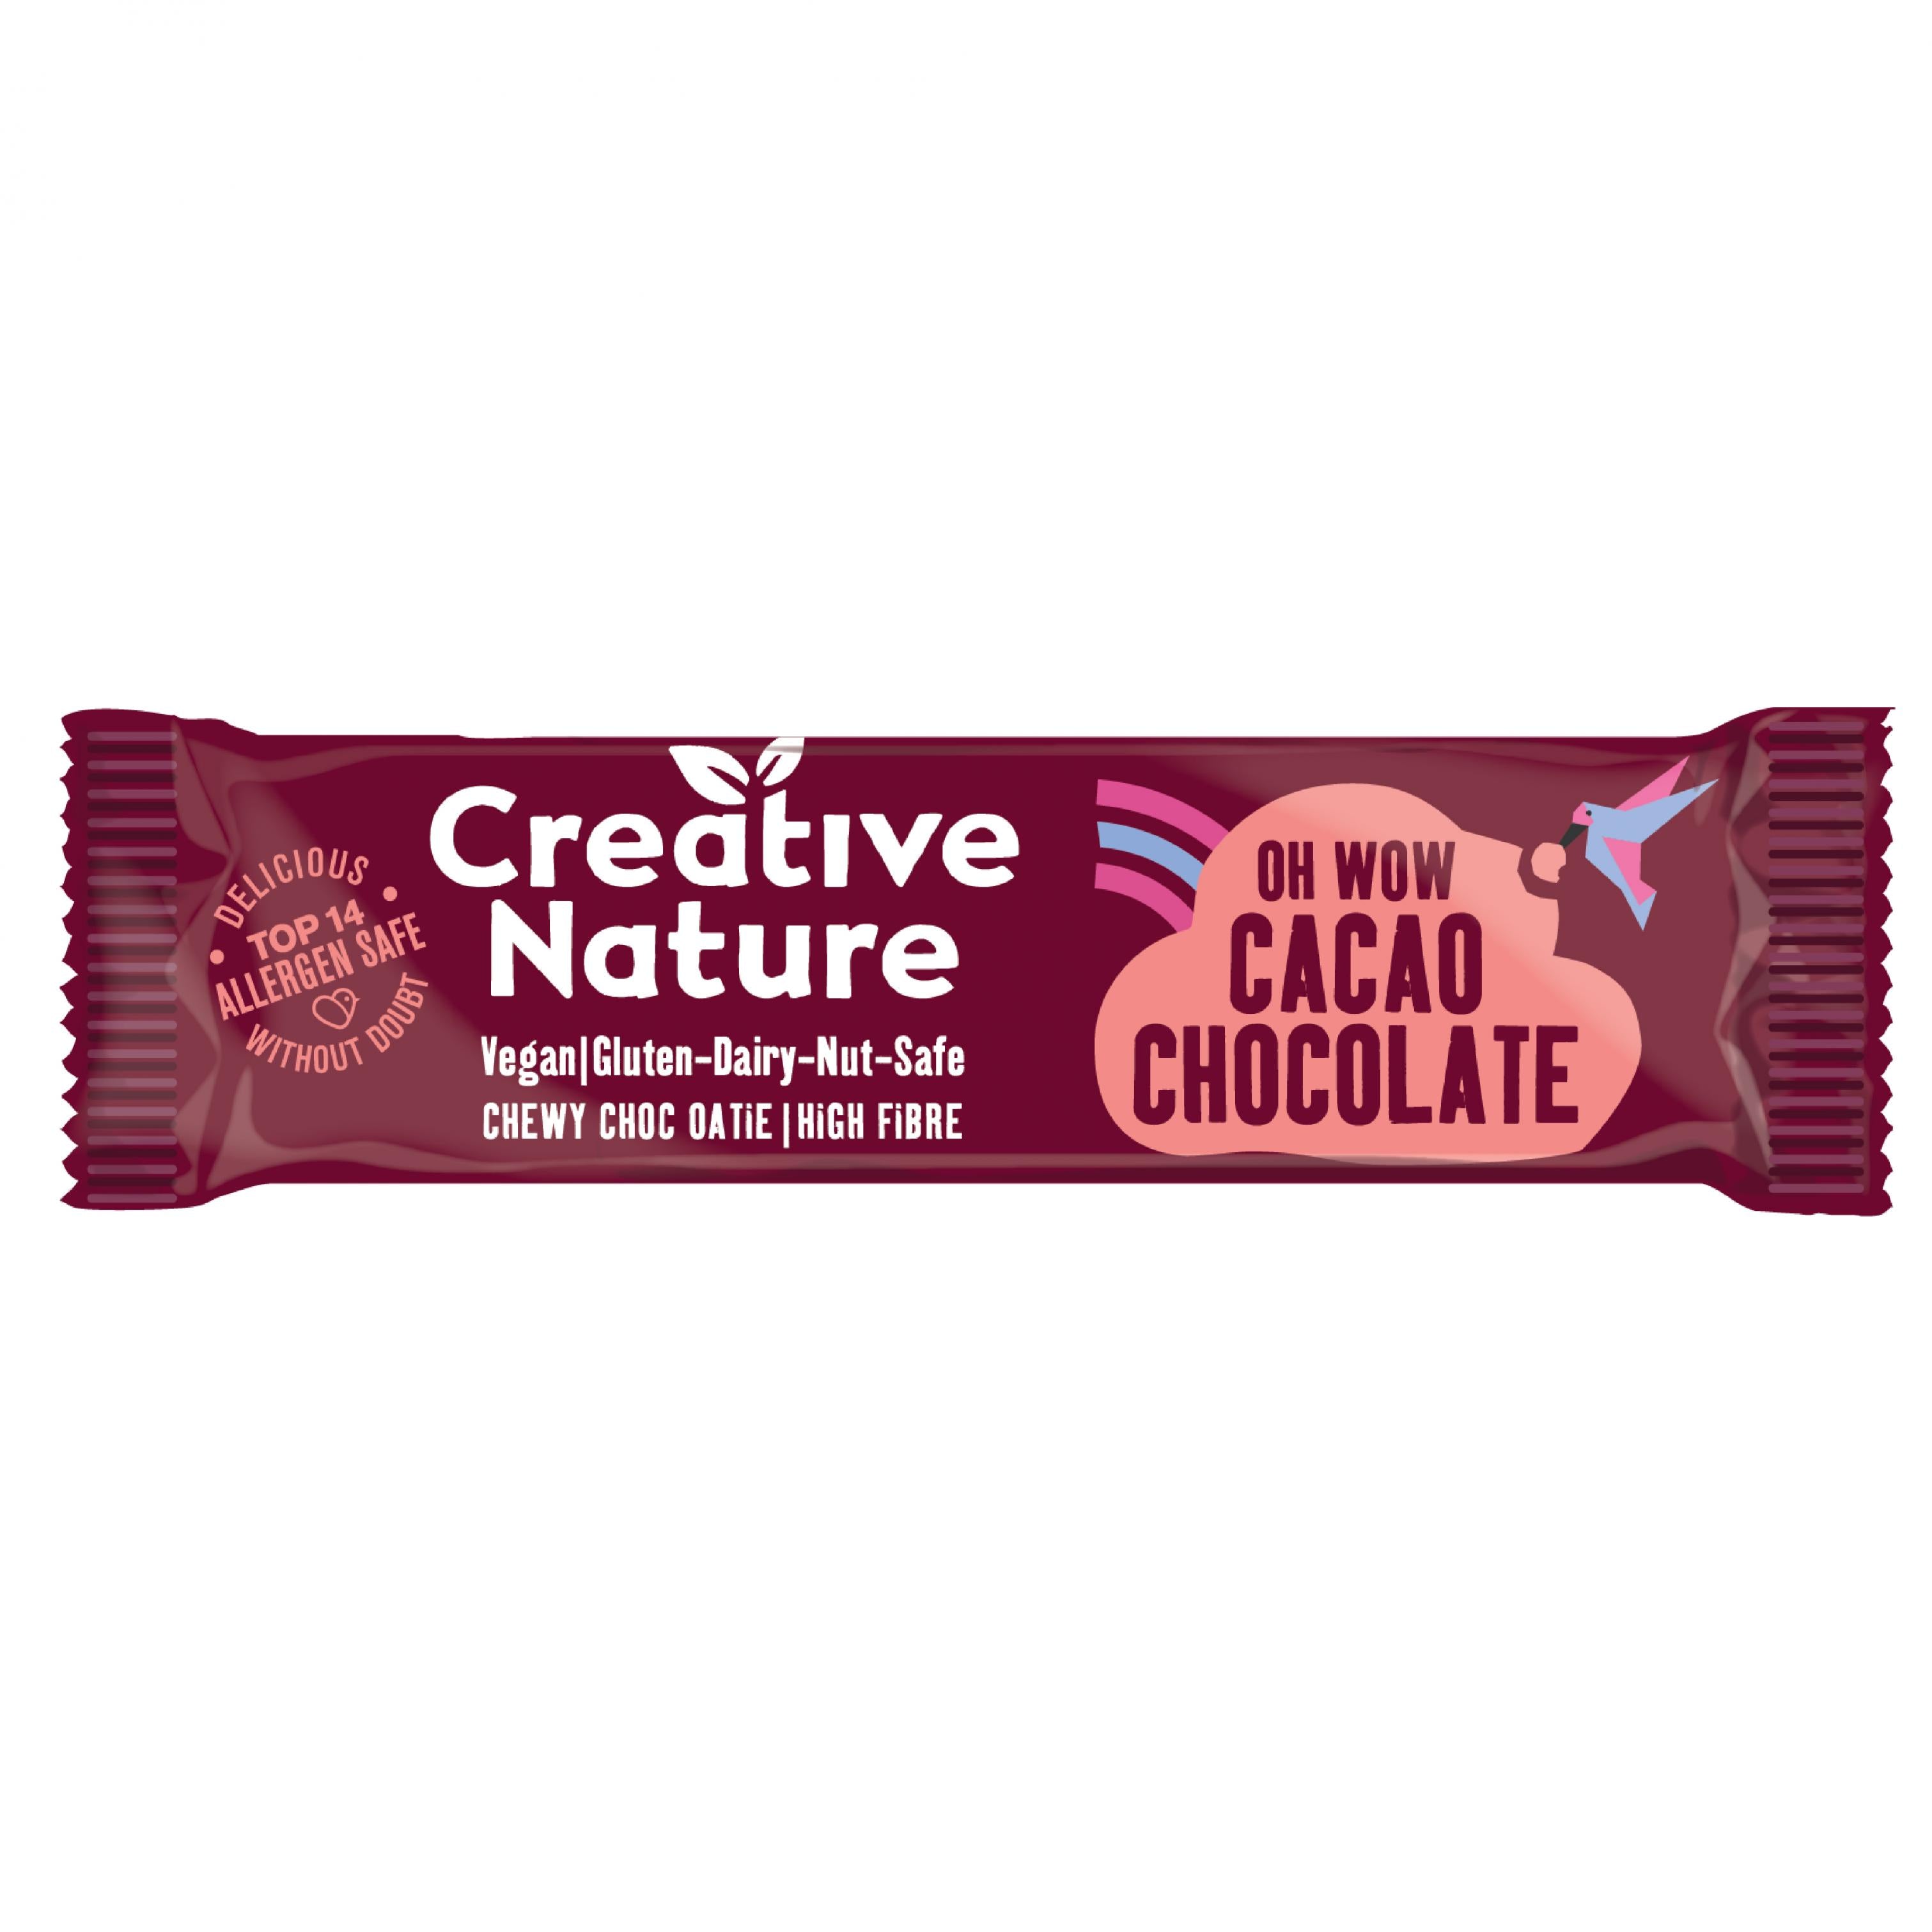 Creative Nature Oh Wow Cacao Chocolate Chewy Choc Oatie Bar